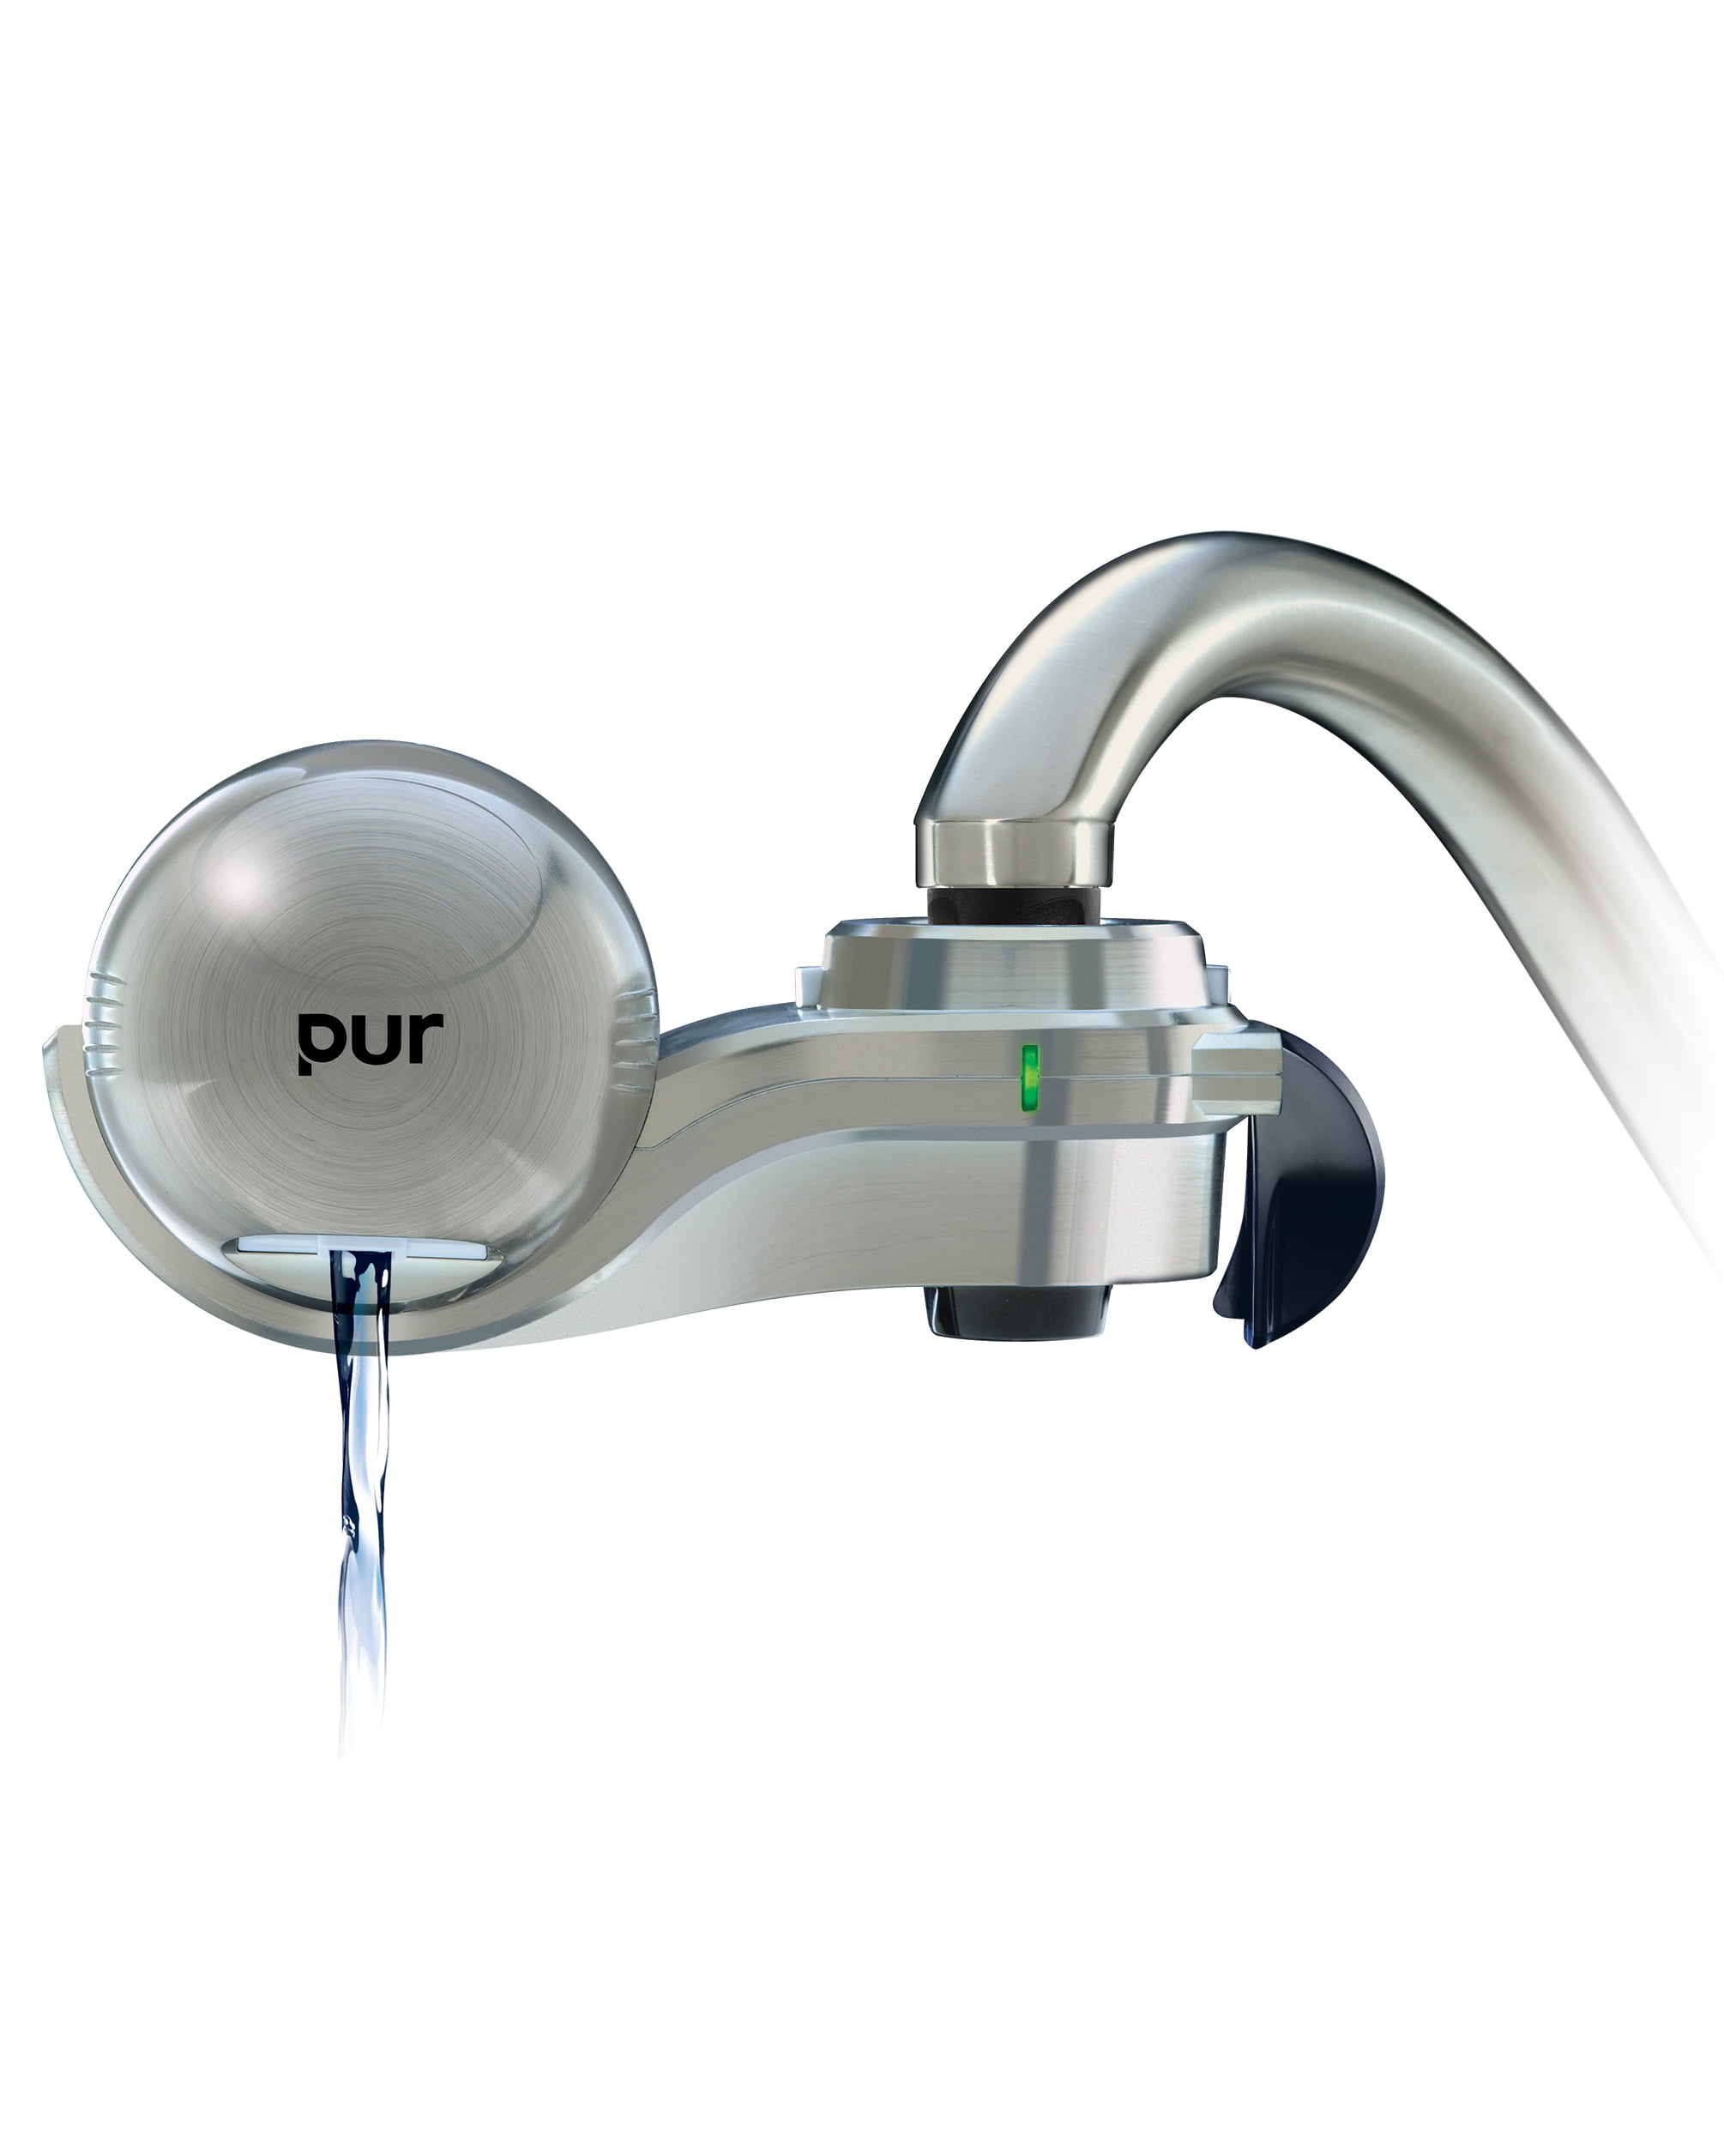 pur-faucet-water-filter-fm-9000b-stainless-steel-style-walmart